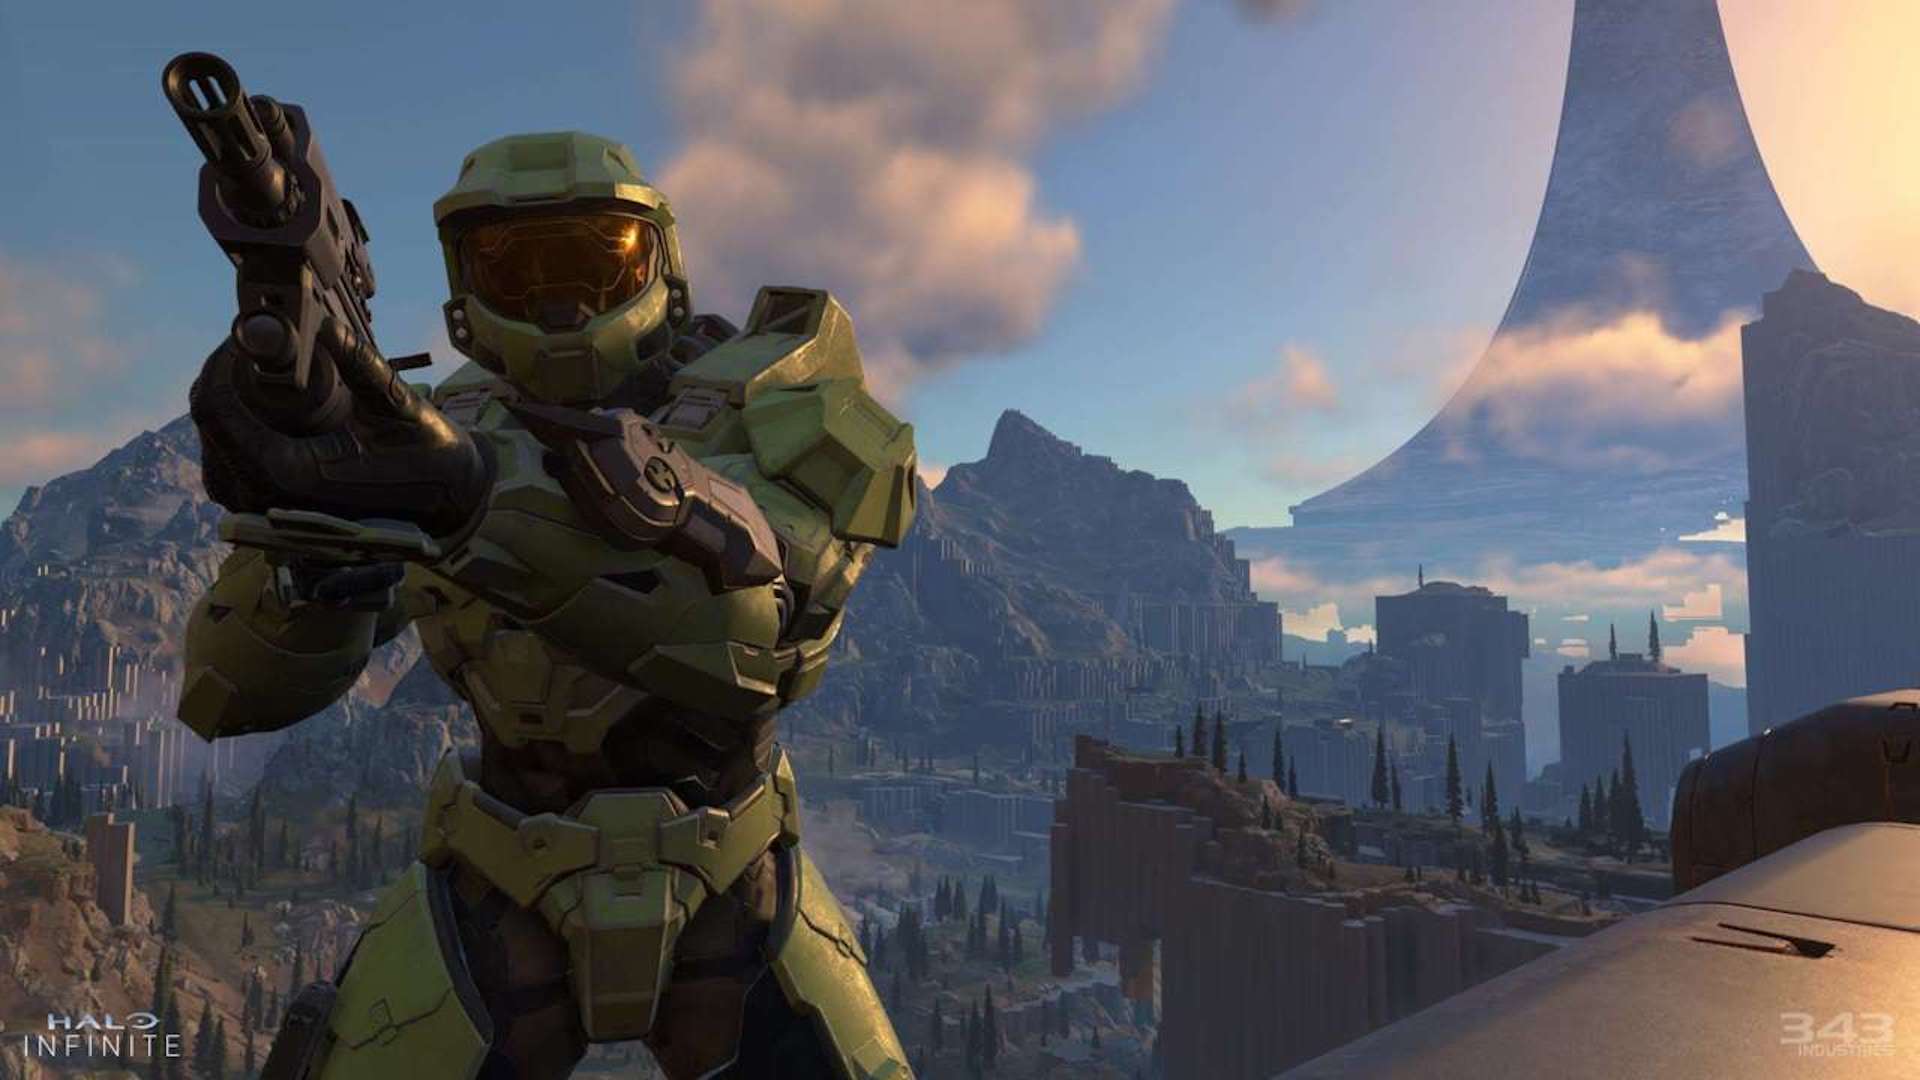 Halo Infinite – Certain Affinity Confirms Partnership With 343 Industries